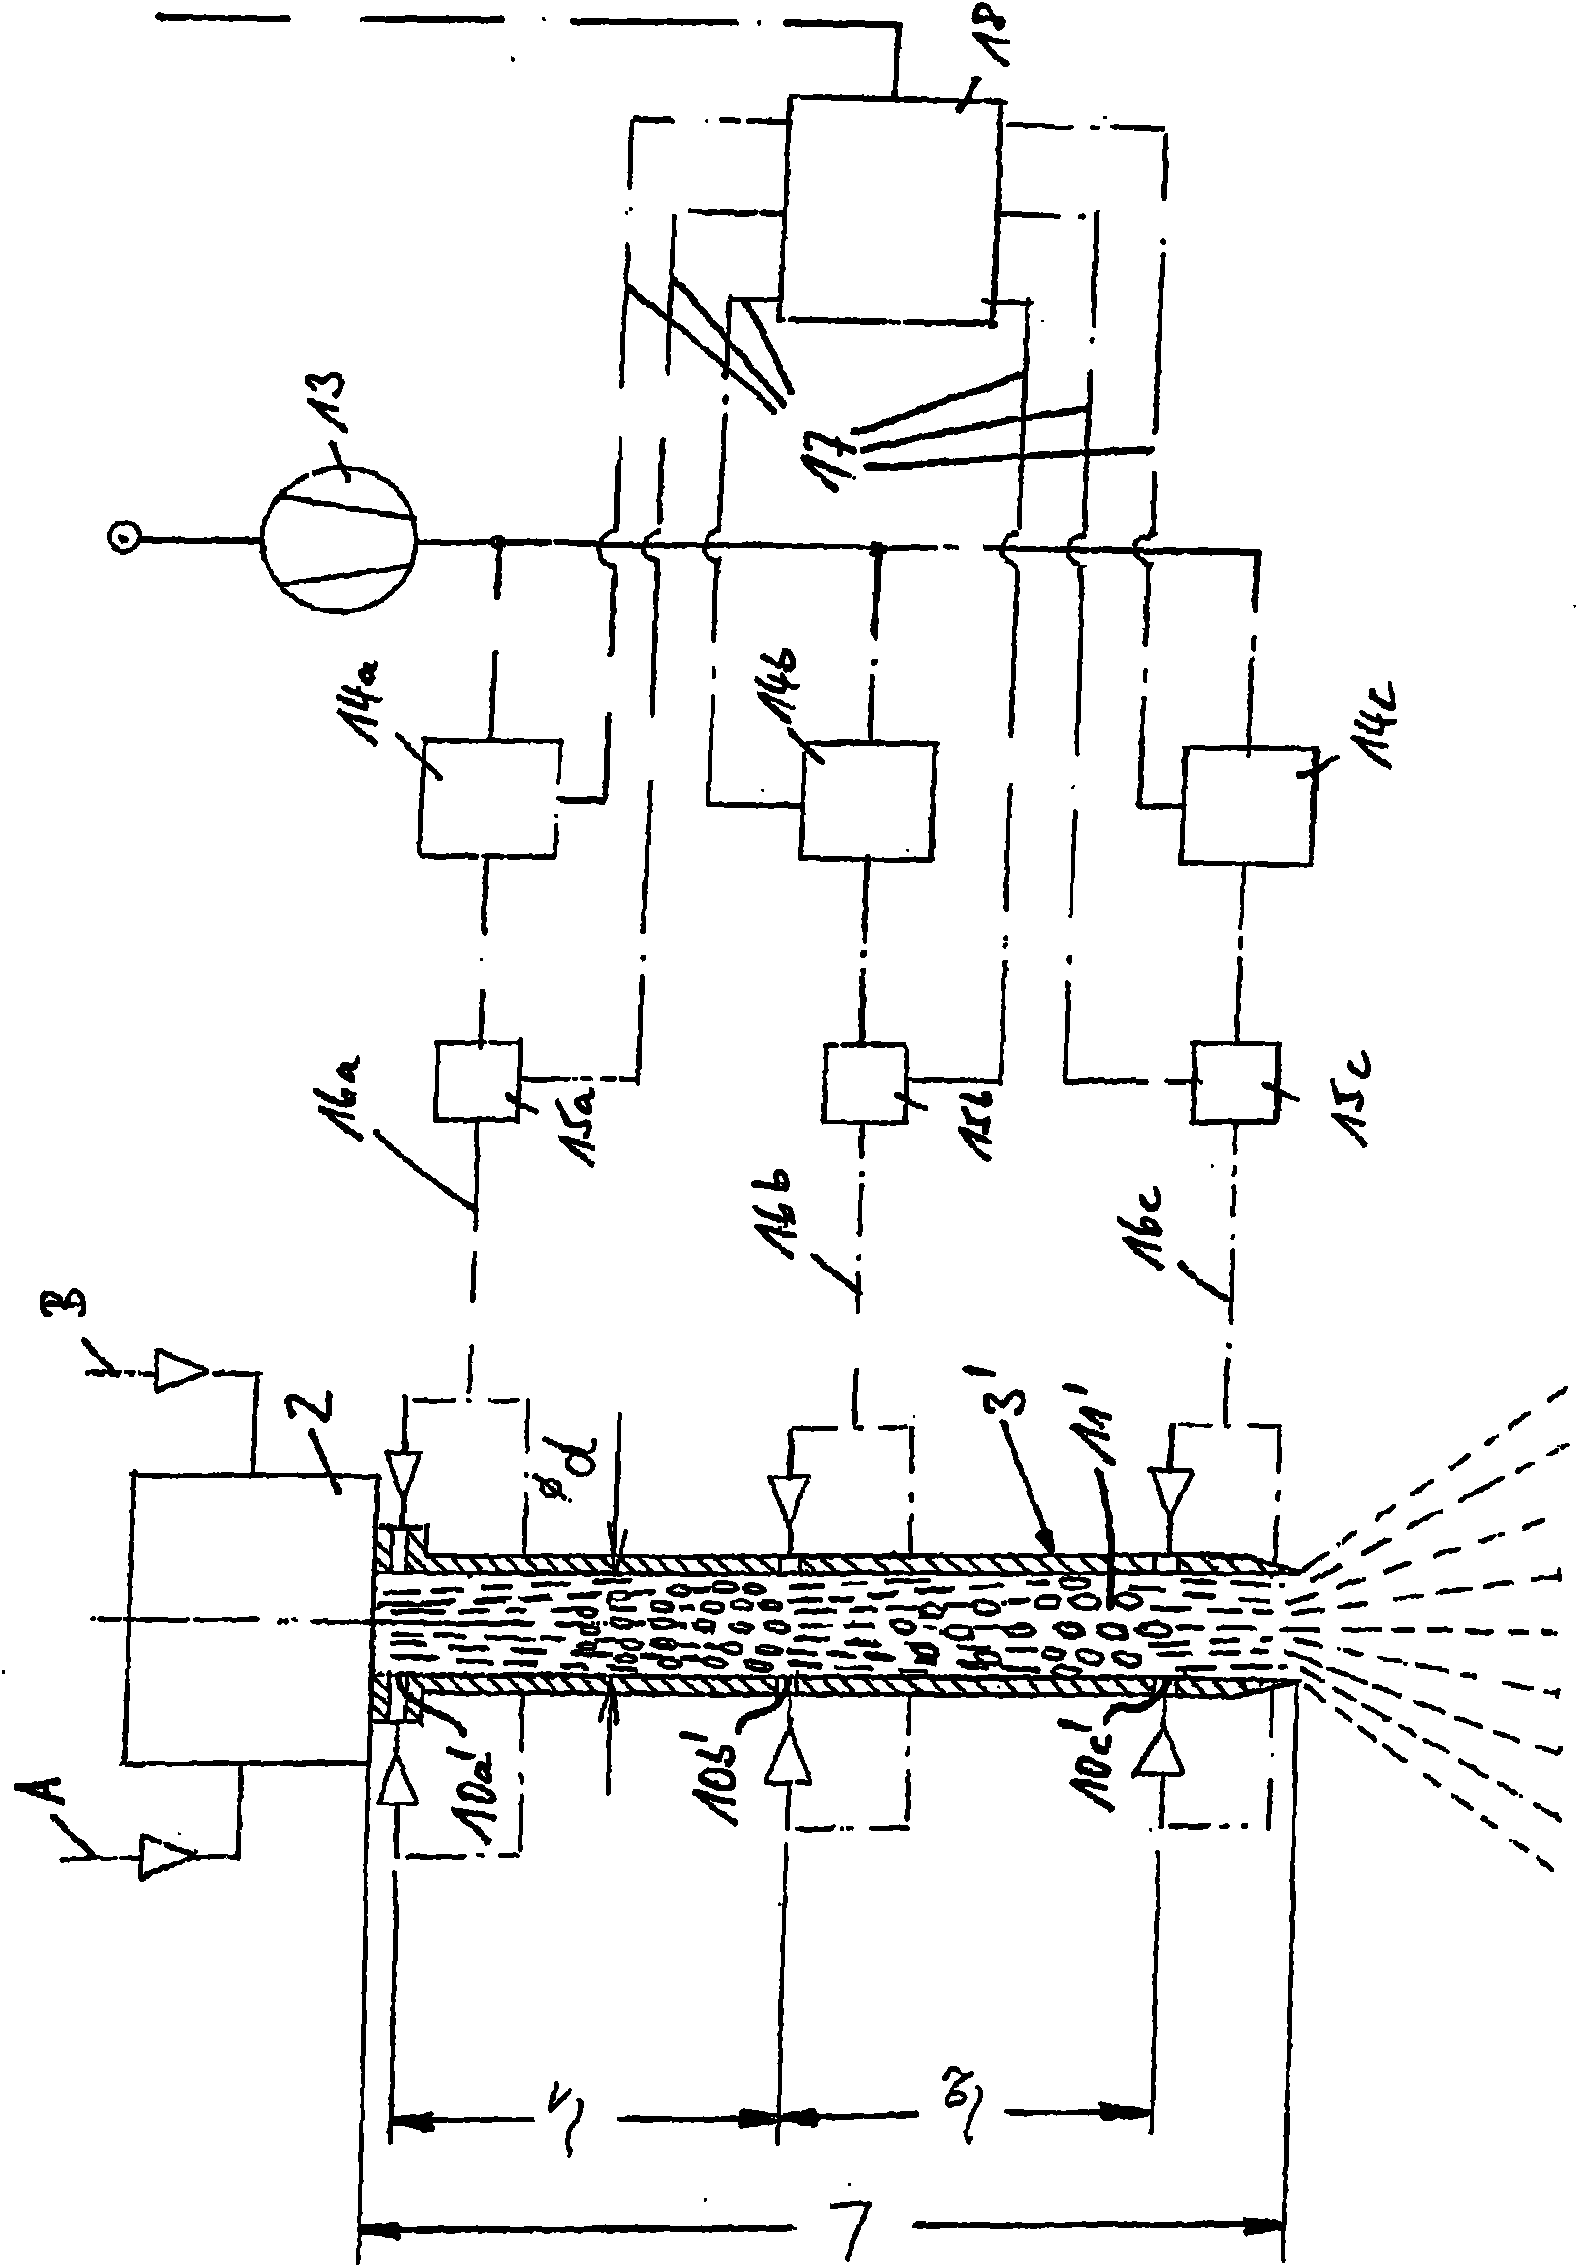 Method and device for the production of moulded pieces from a layer of polyurethane